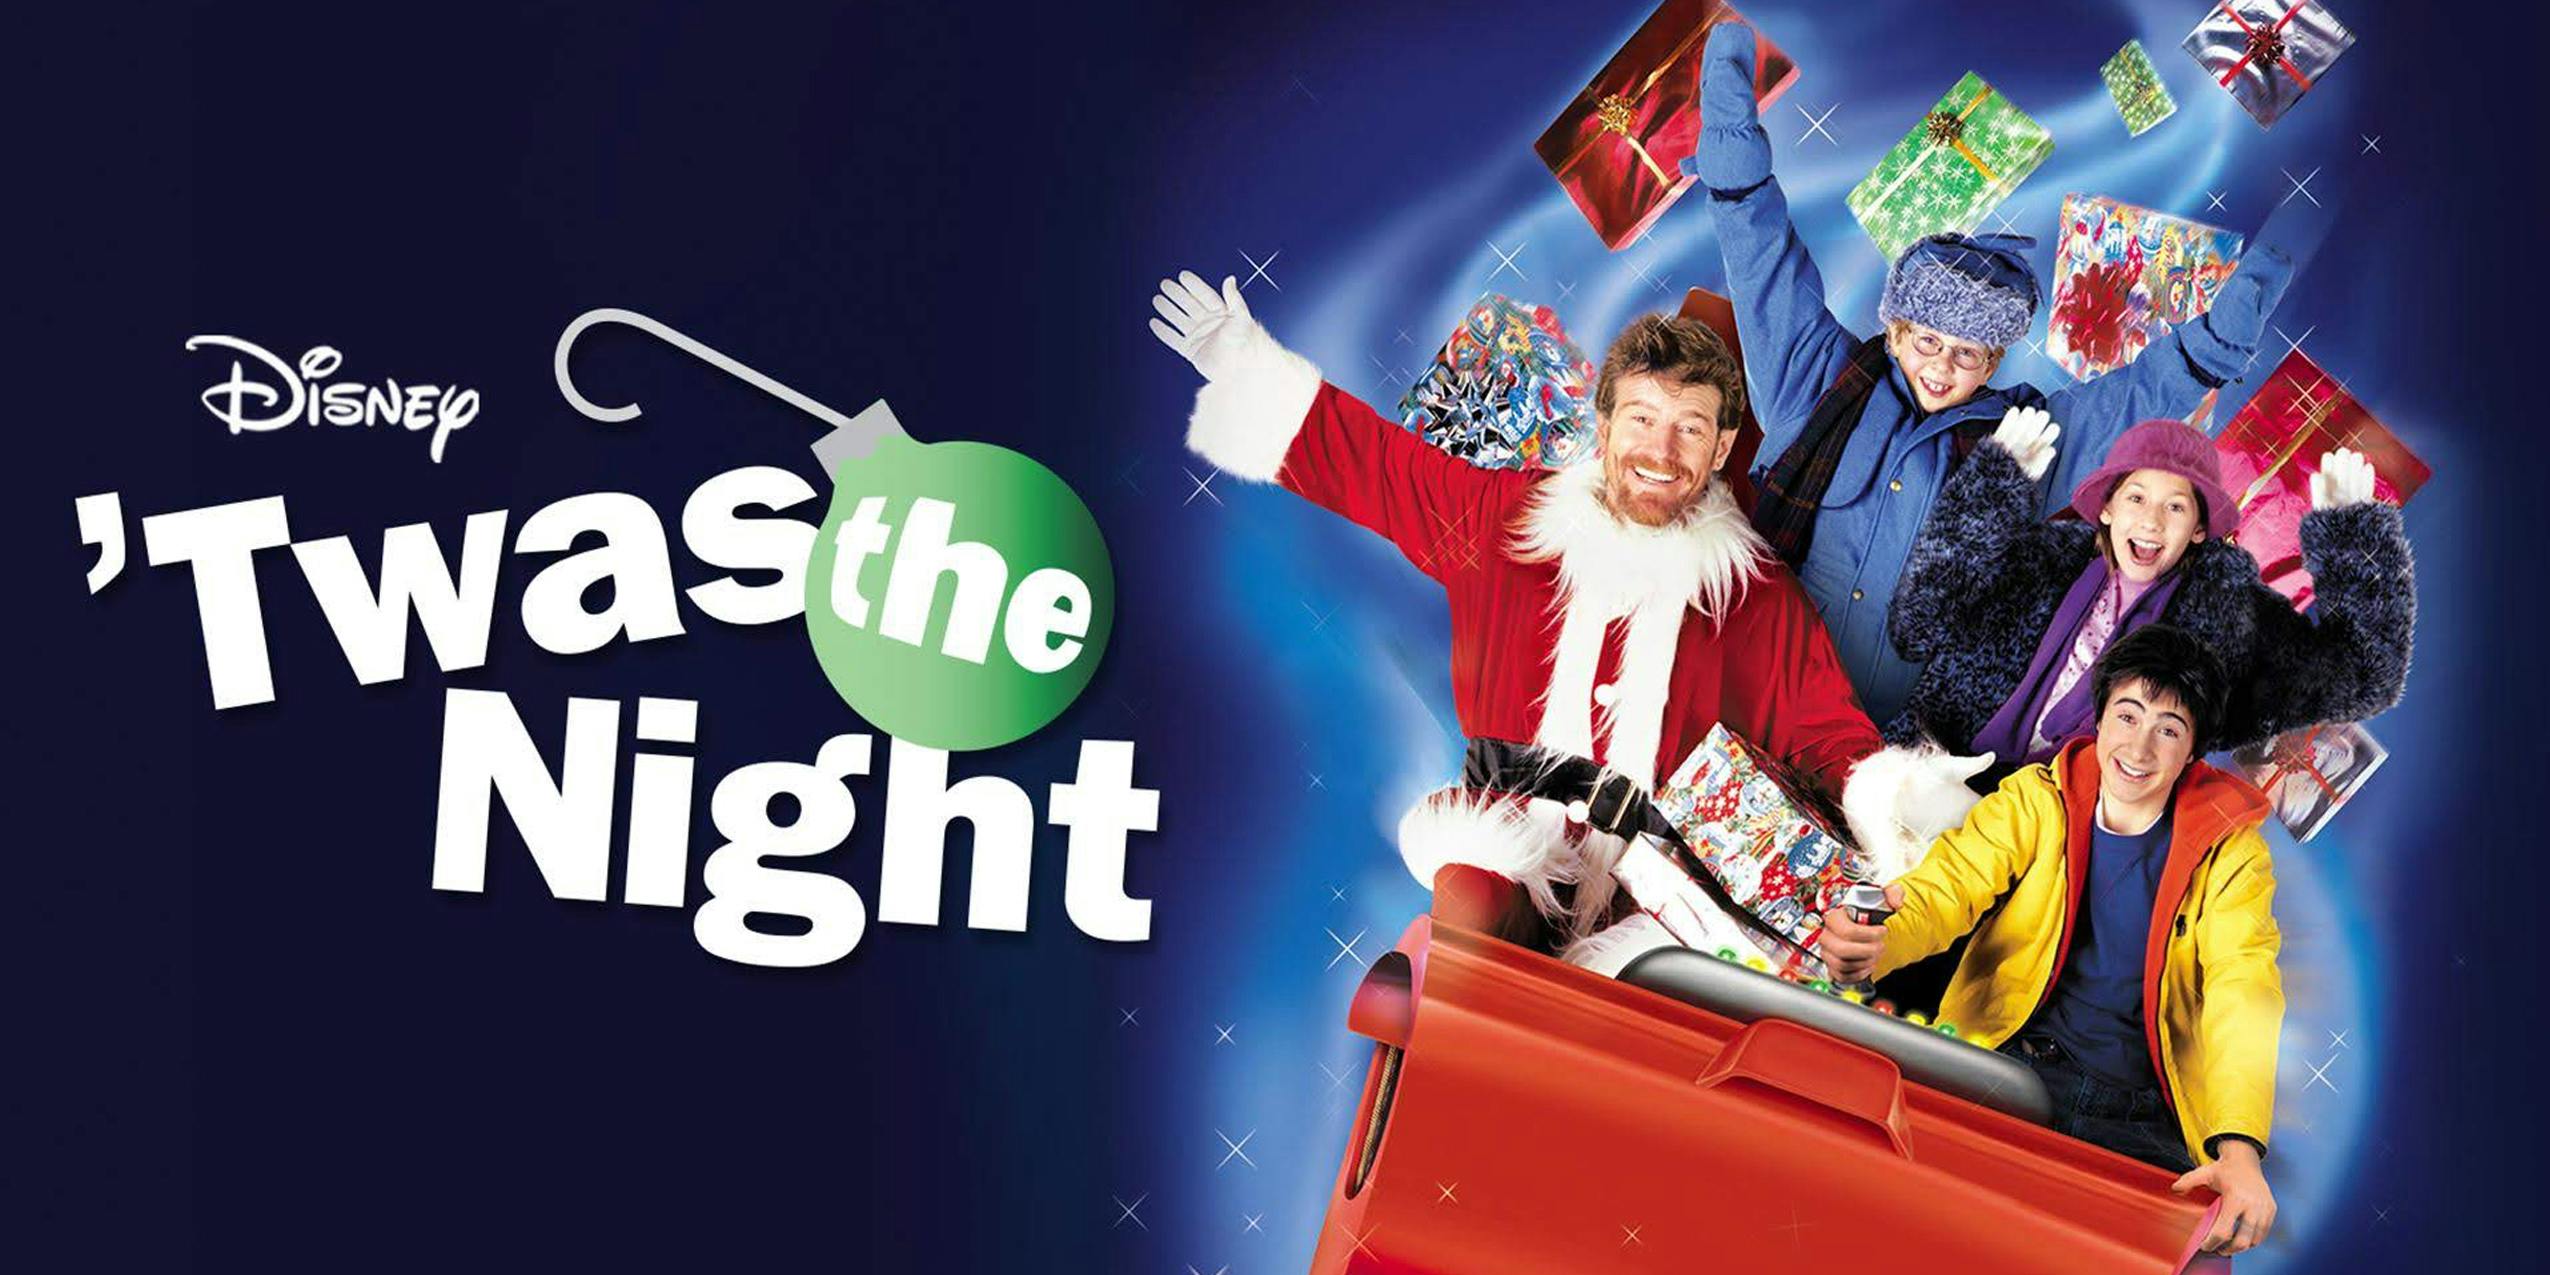 A poster for the Disney Channel original Christmas movie 'Twas the Night featuring Bryan Cranston.